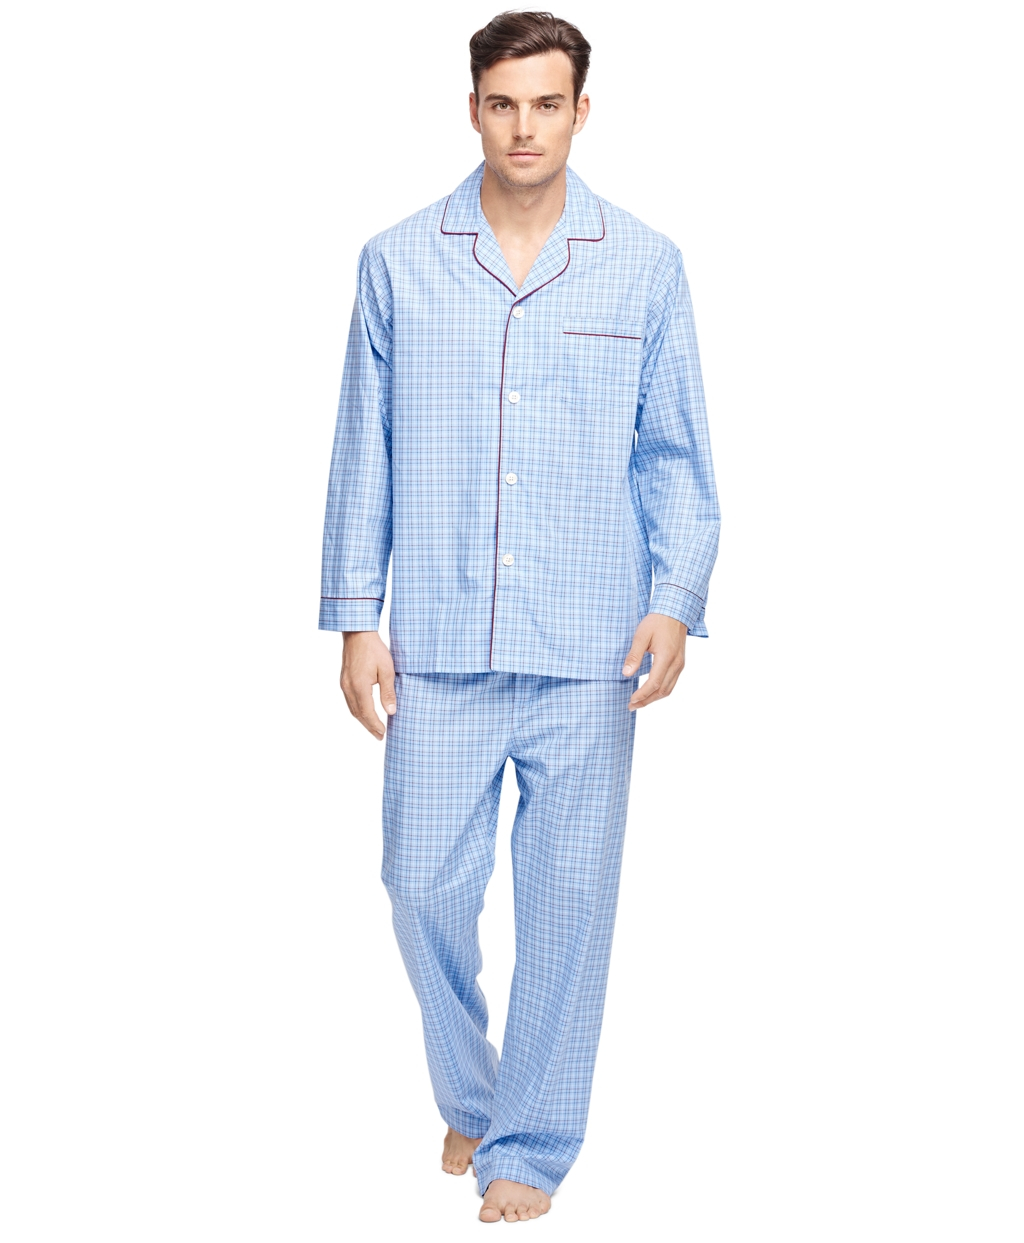 Lyst - Brooks Brothers Check Pajamas in Blue for Men